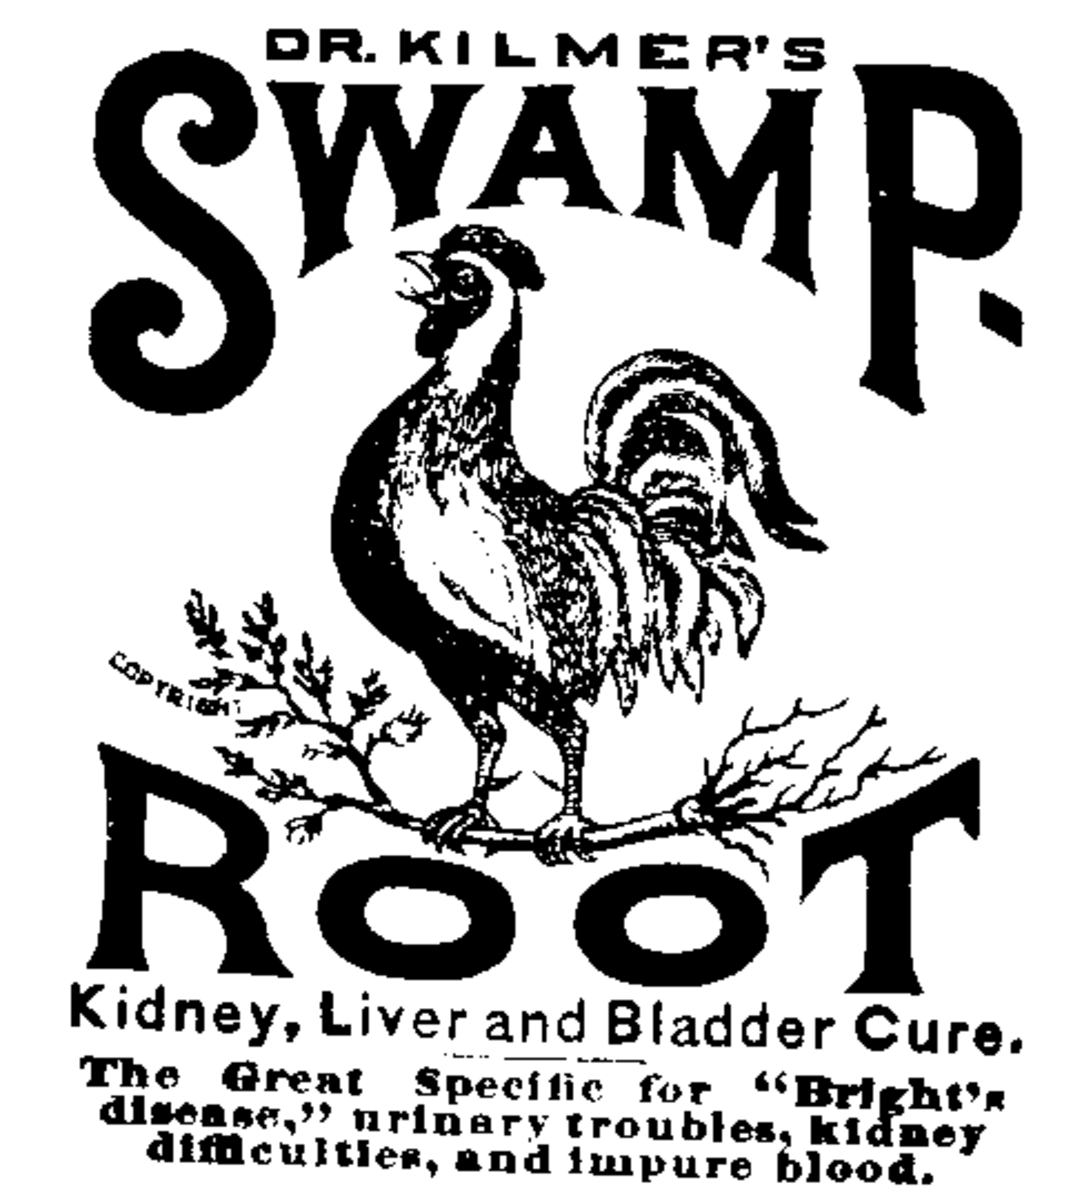 Gold Rush Medicine: Swamp Root, Snake Oil and More